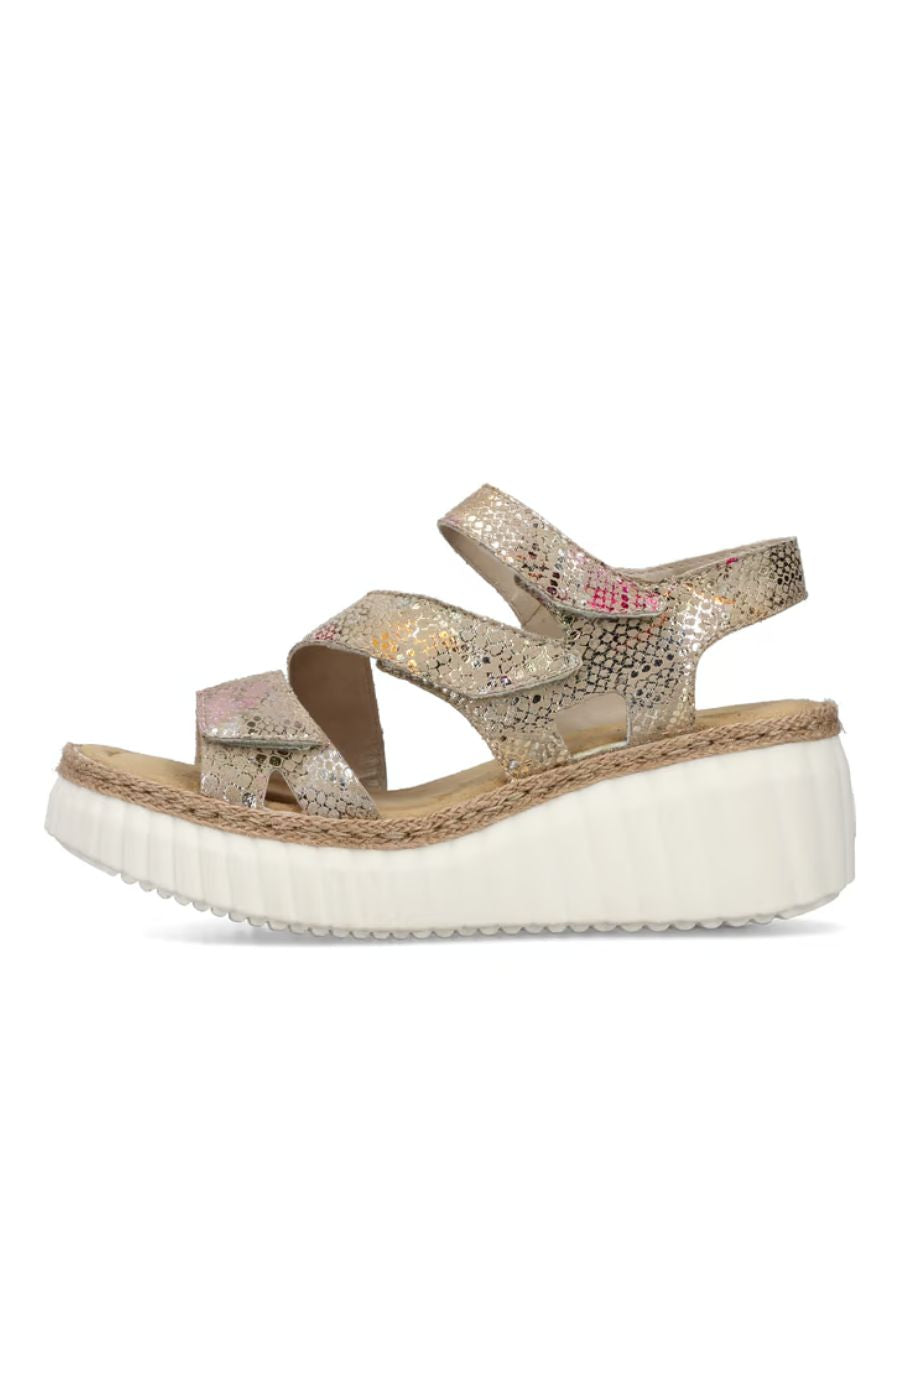 Rieker Wedge Sandals in Beige with Multicoloured